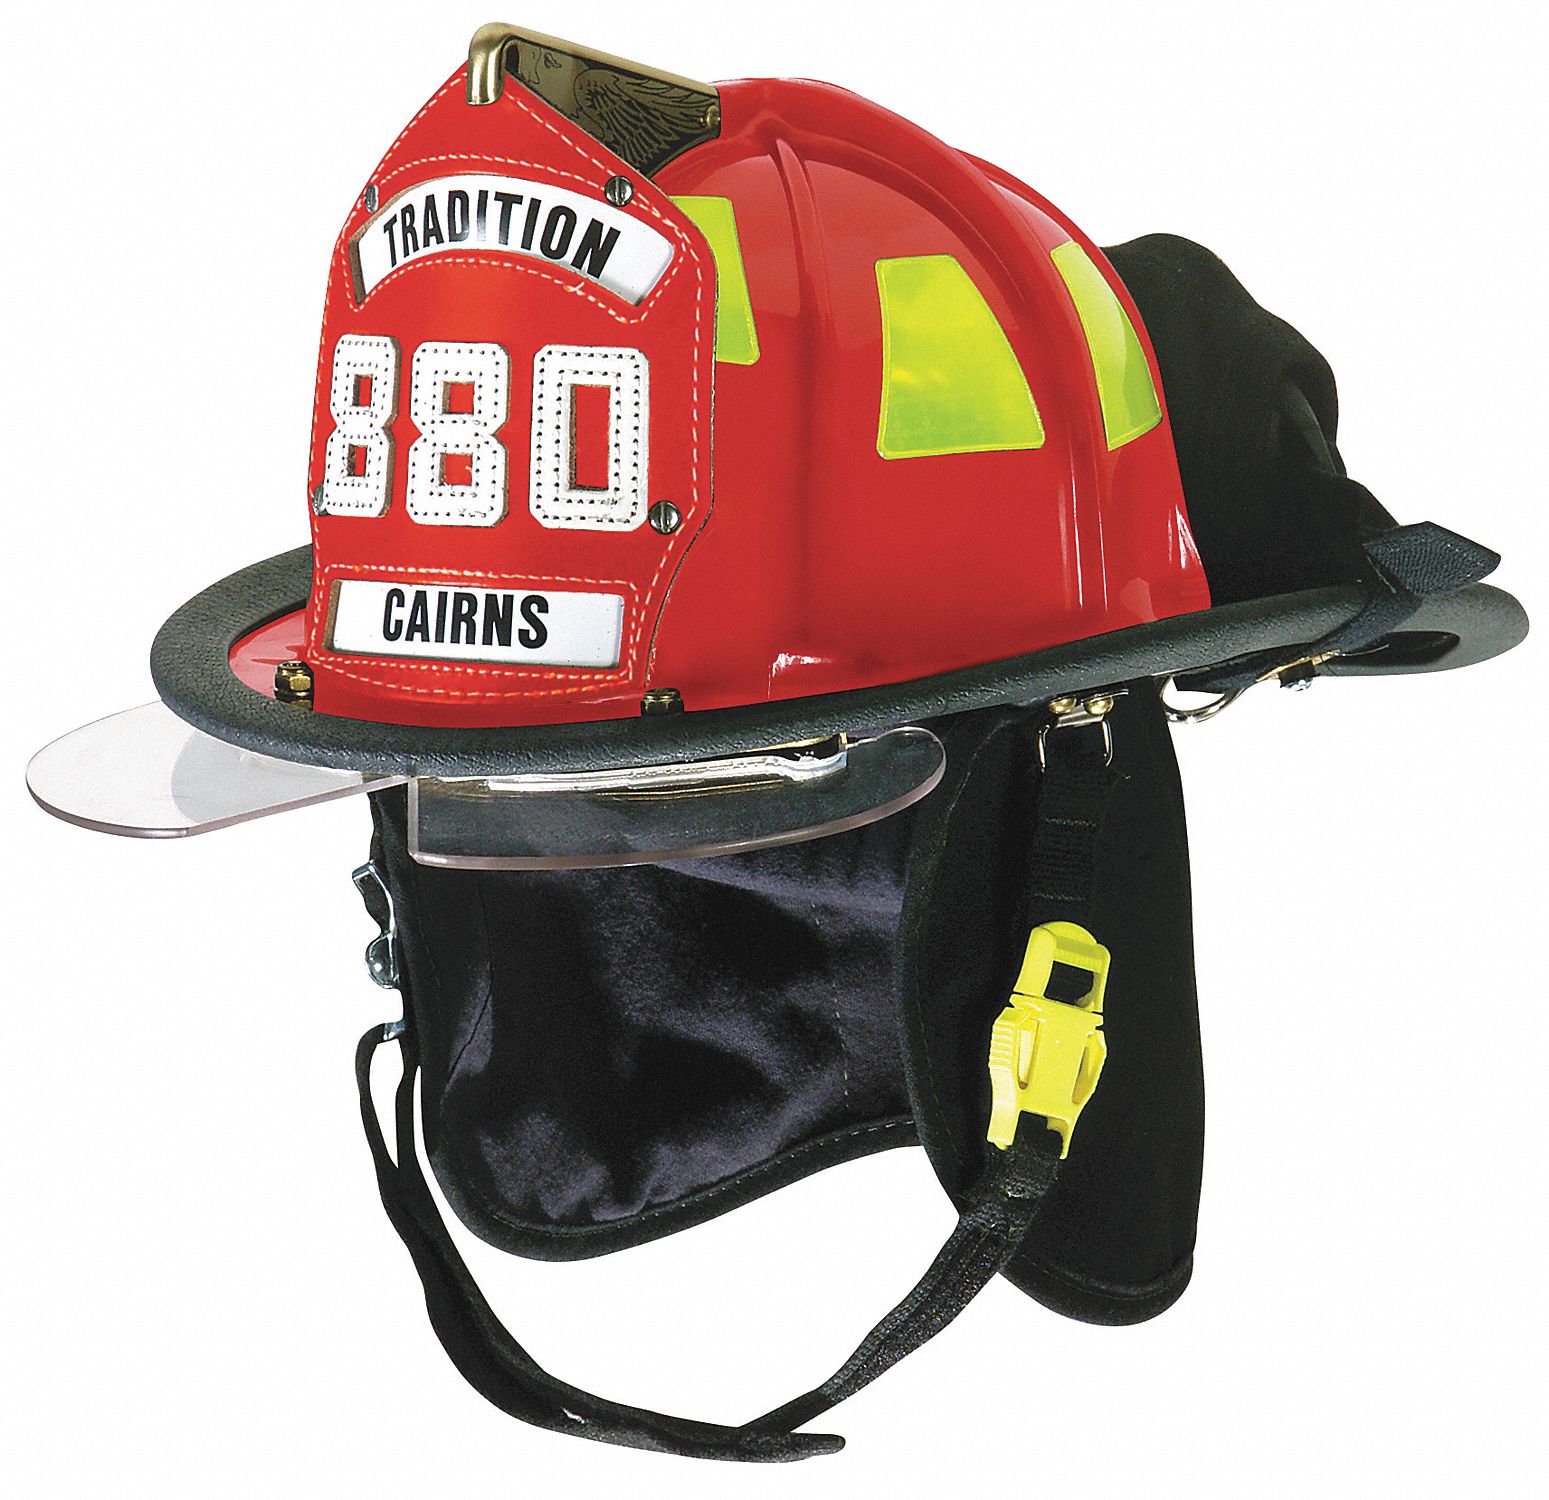 Red Fire Helmet, Shell Material: Thermoplastic, Ratchet Suspension, Fits Hat Size: 5-5/8 to 7 5/8"